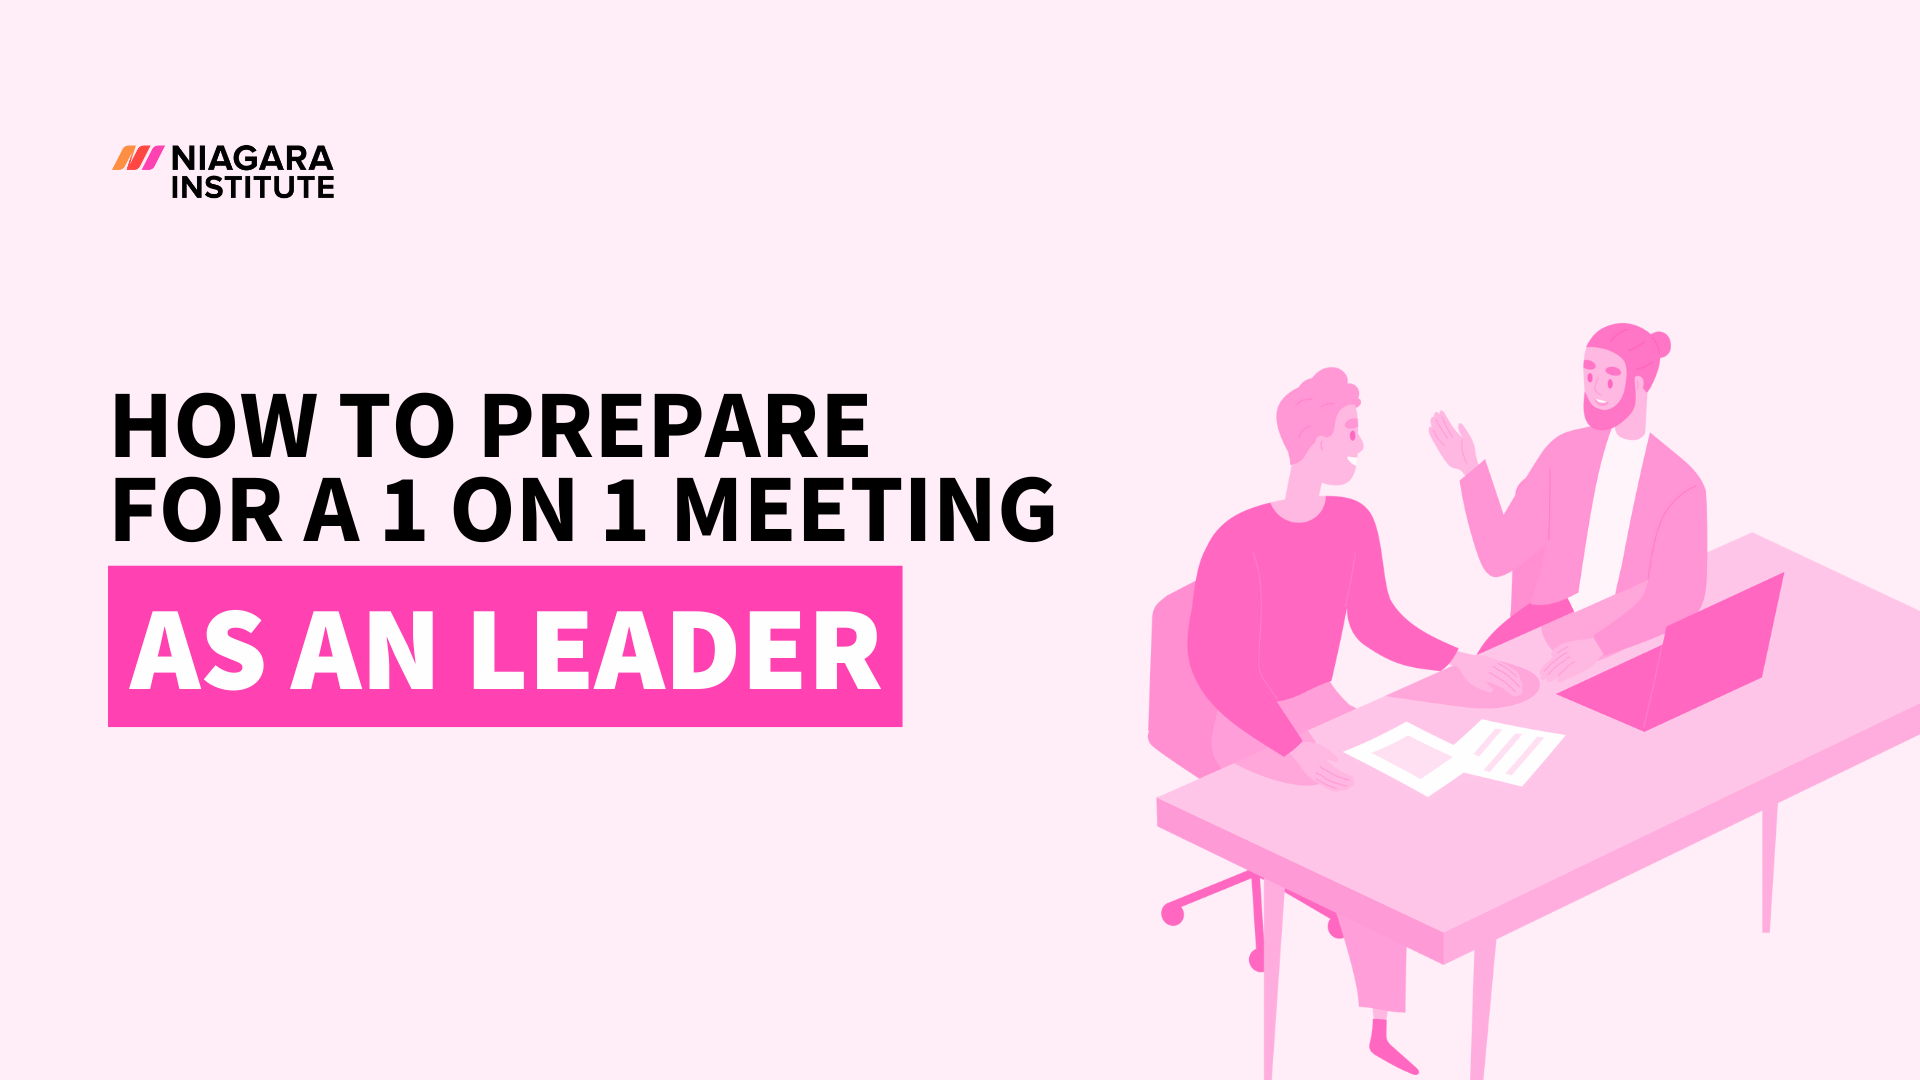 How To Prepare for a 1 On 1 Meeting With Your Employees